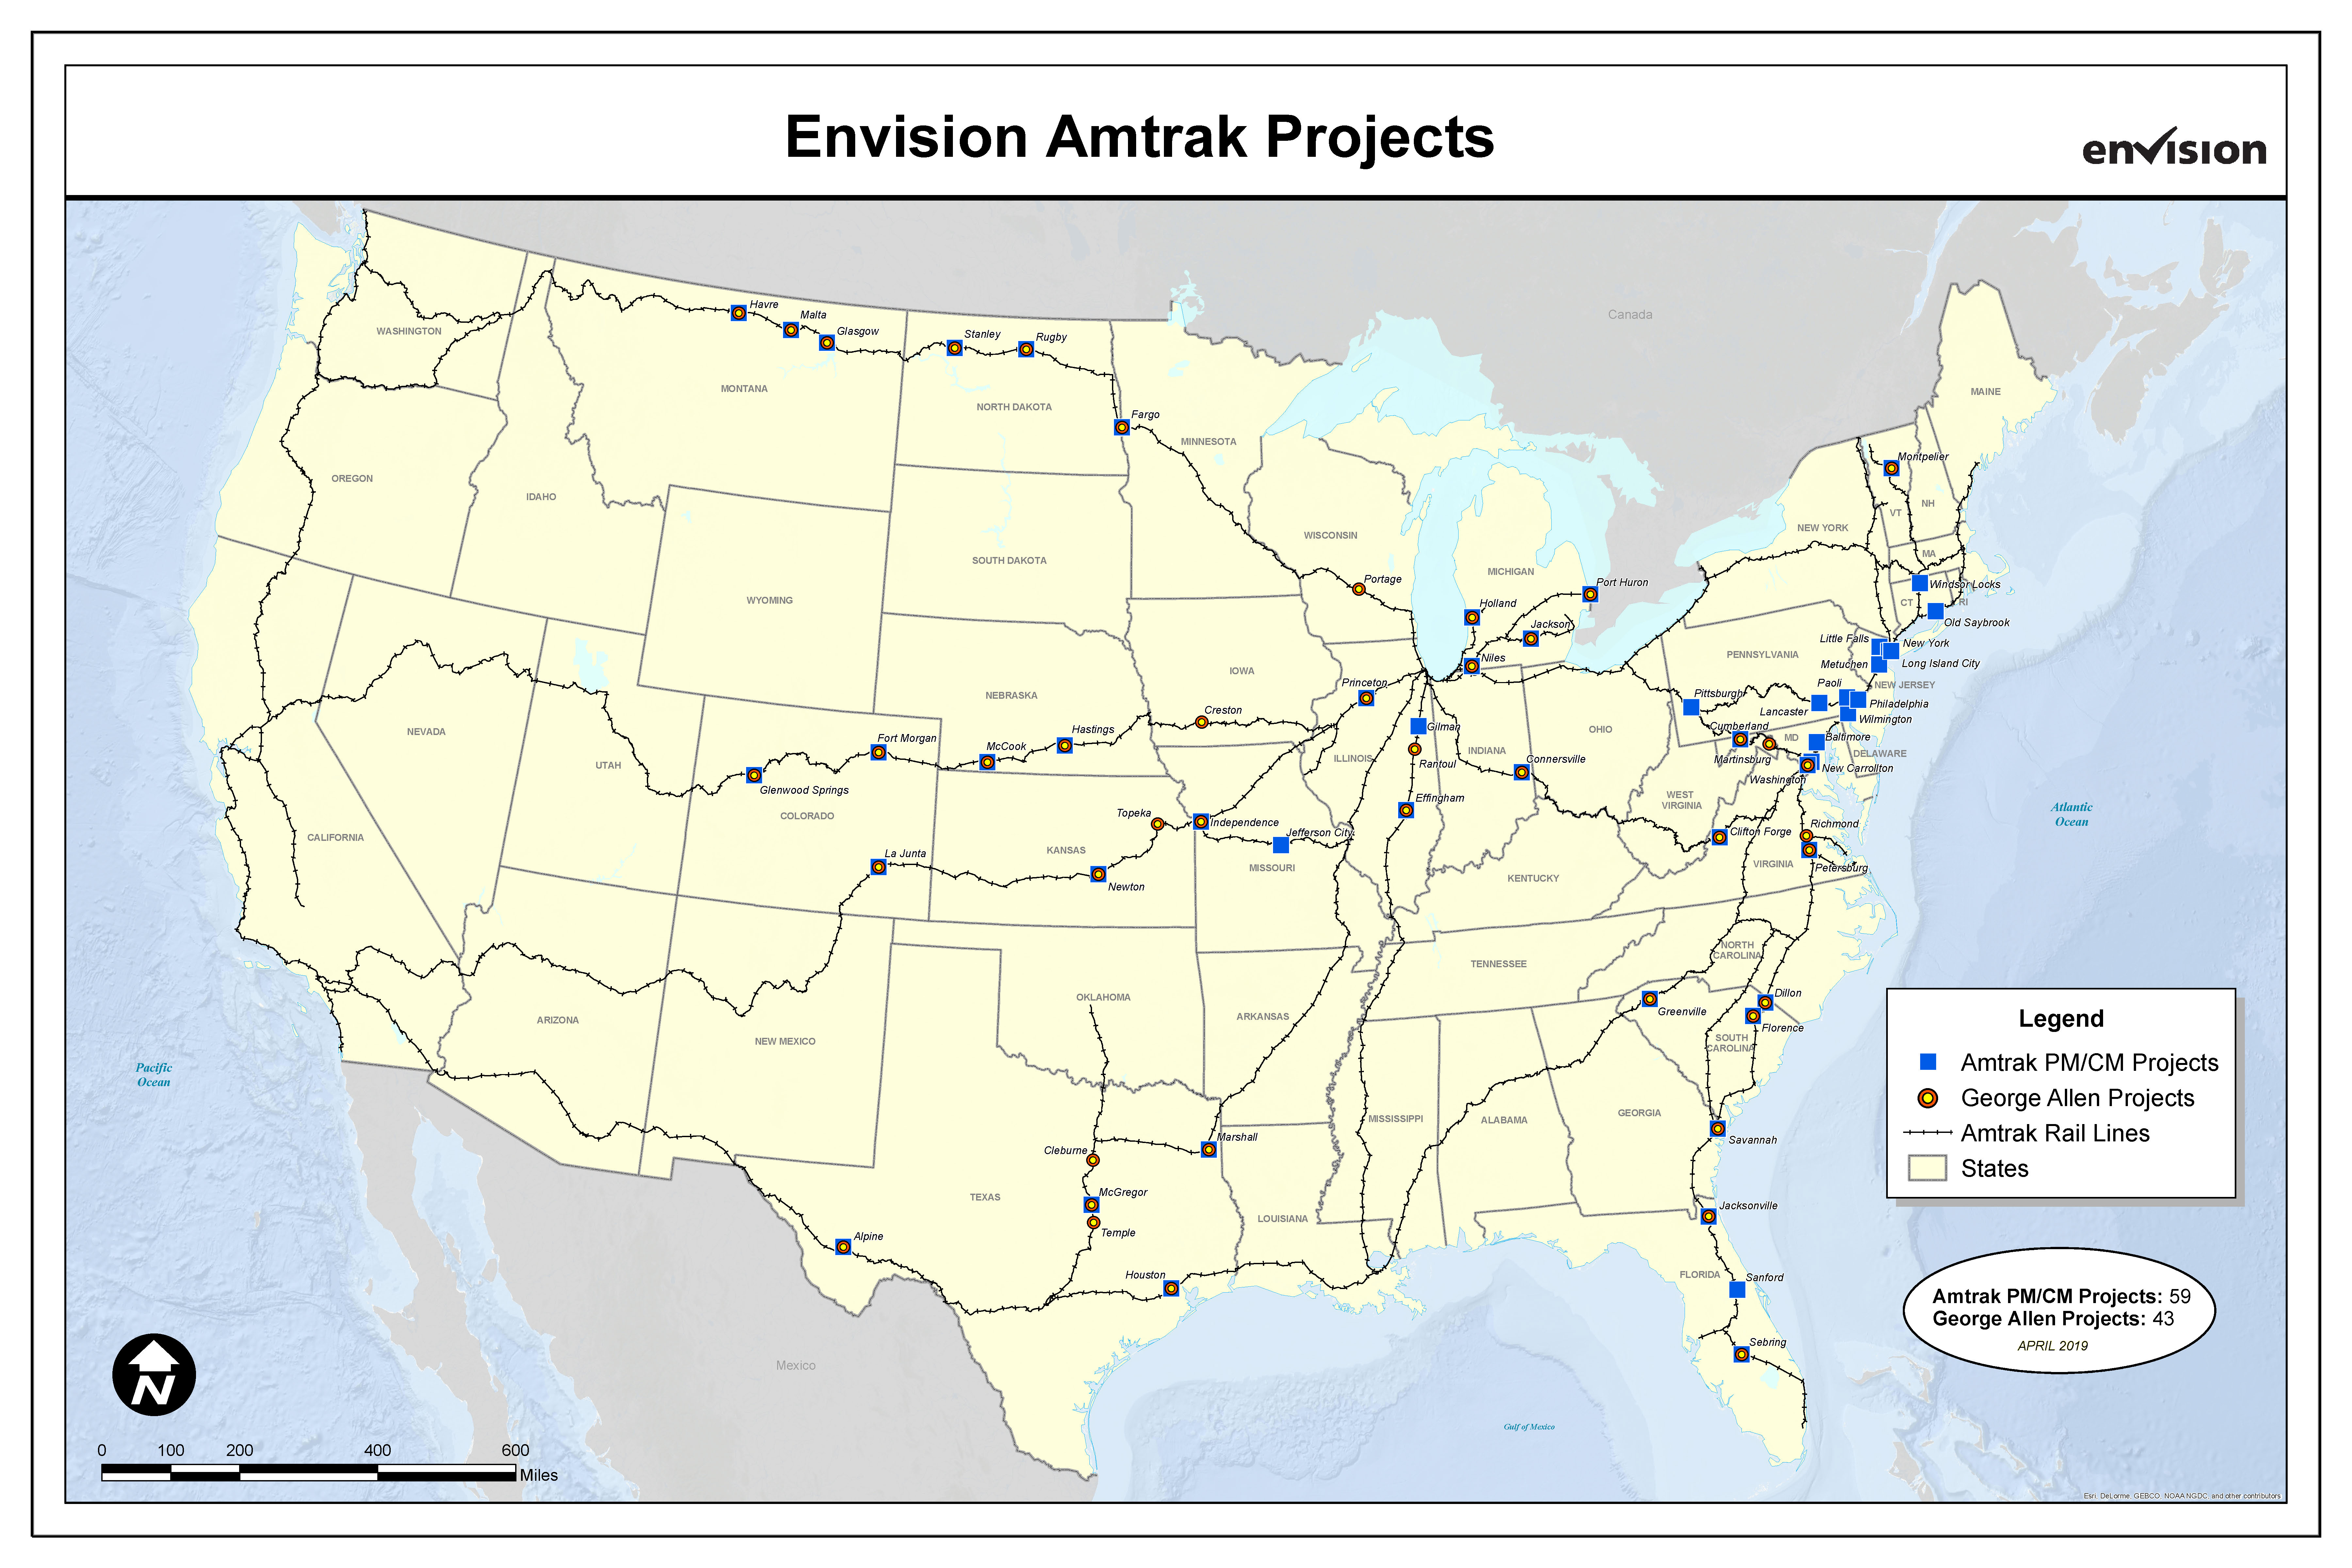 Envision Amtrak Projects